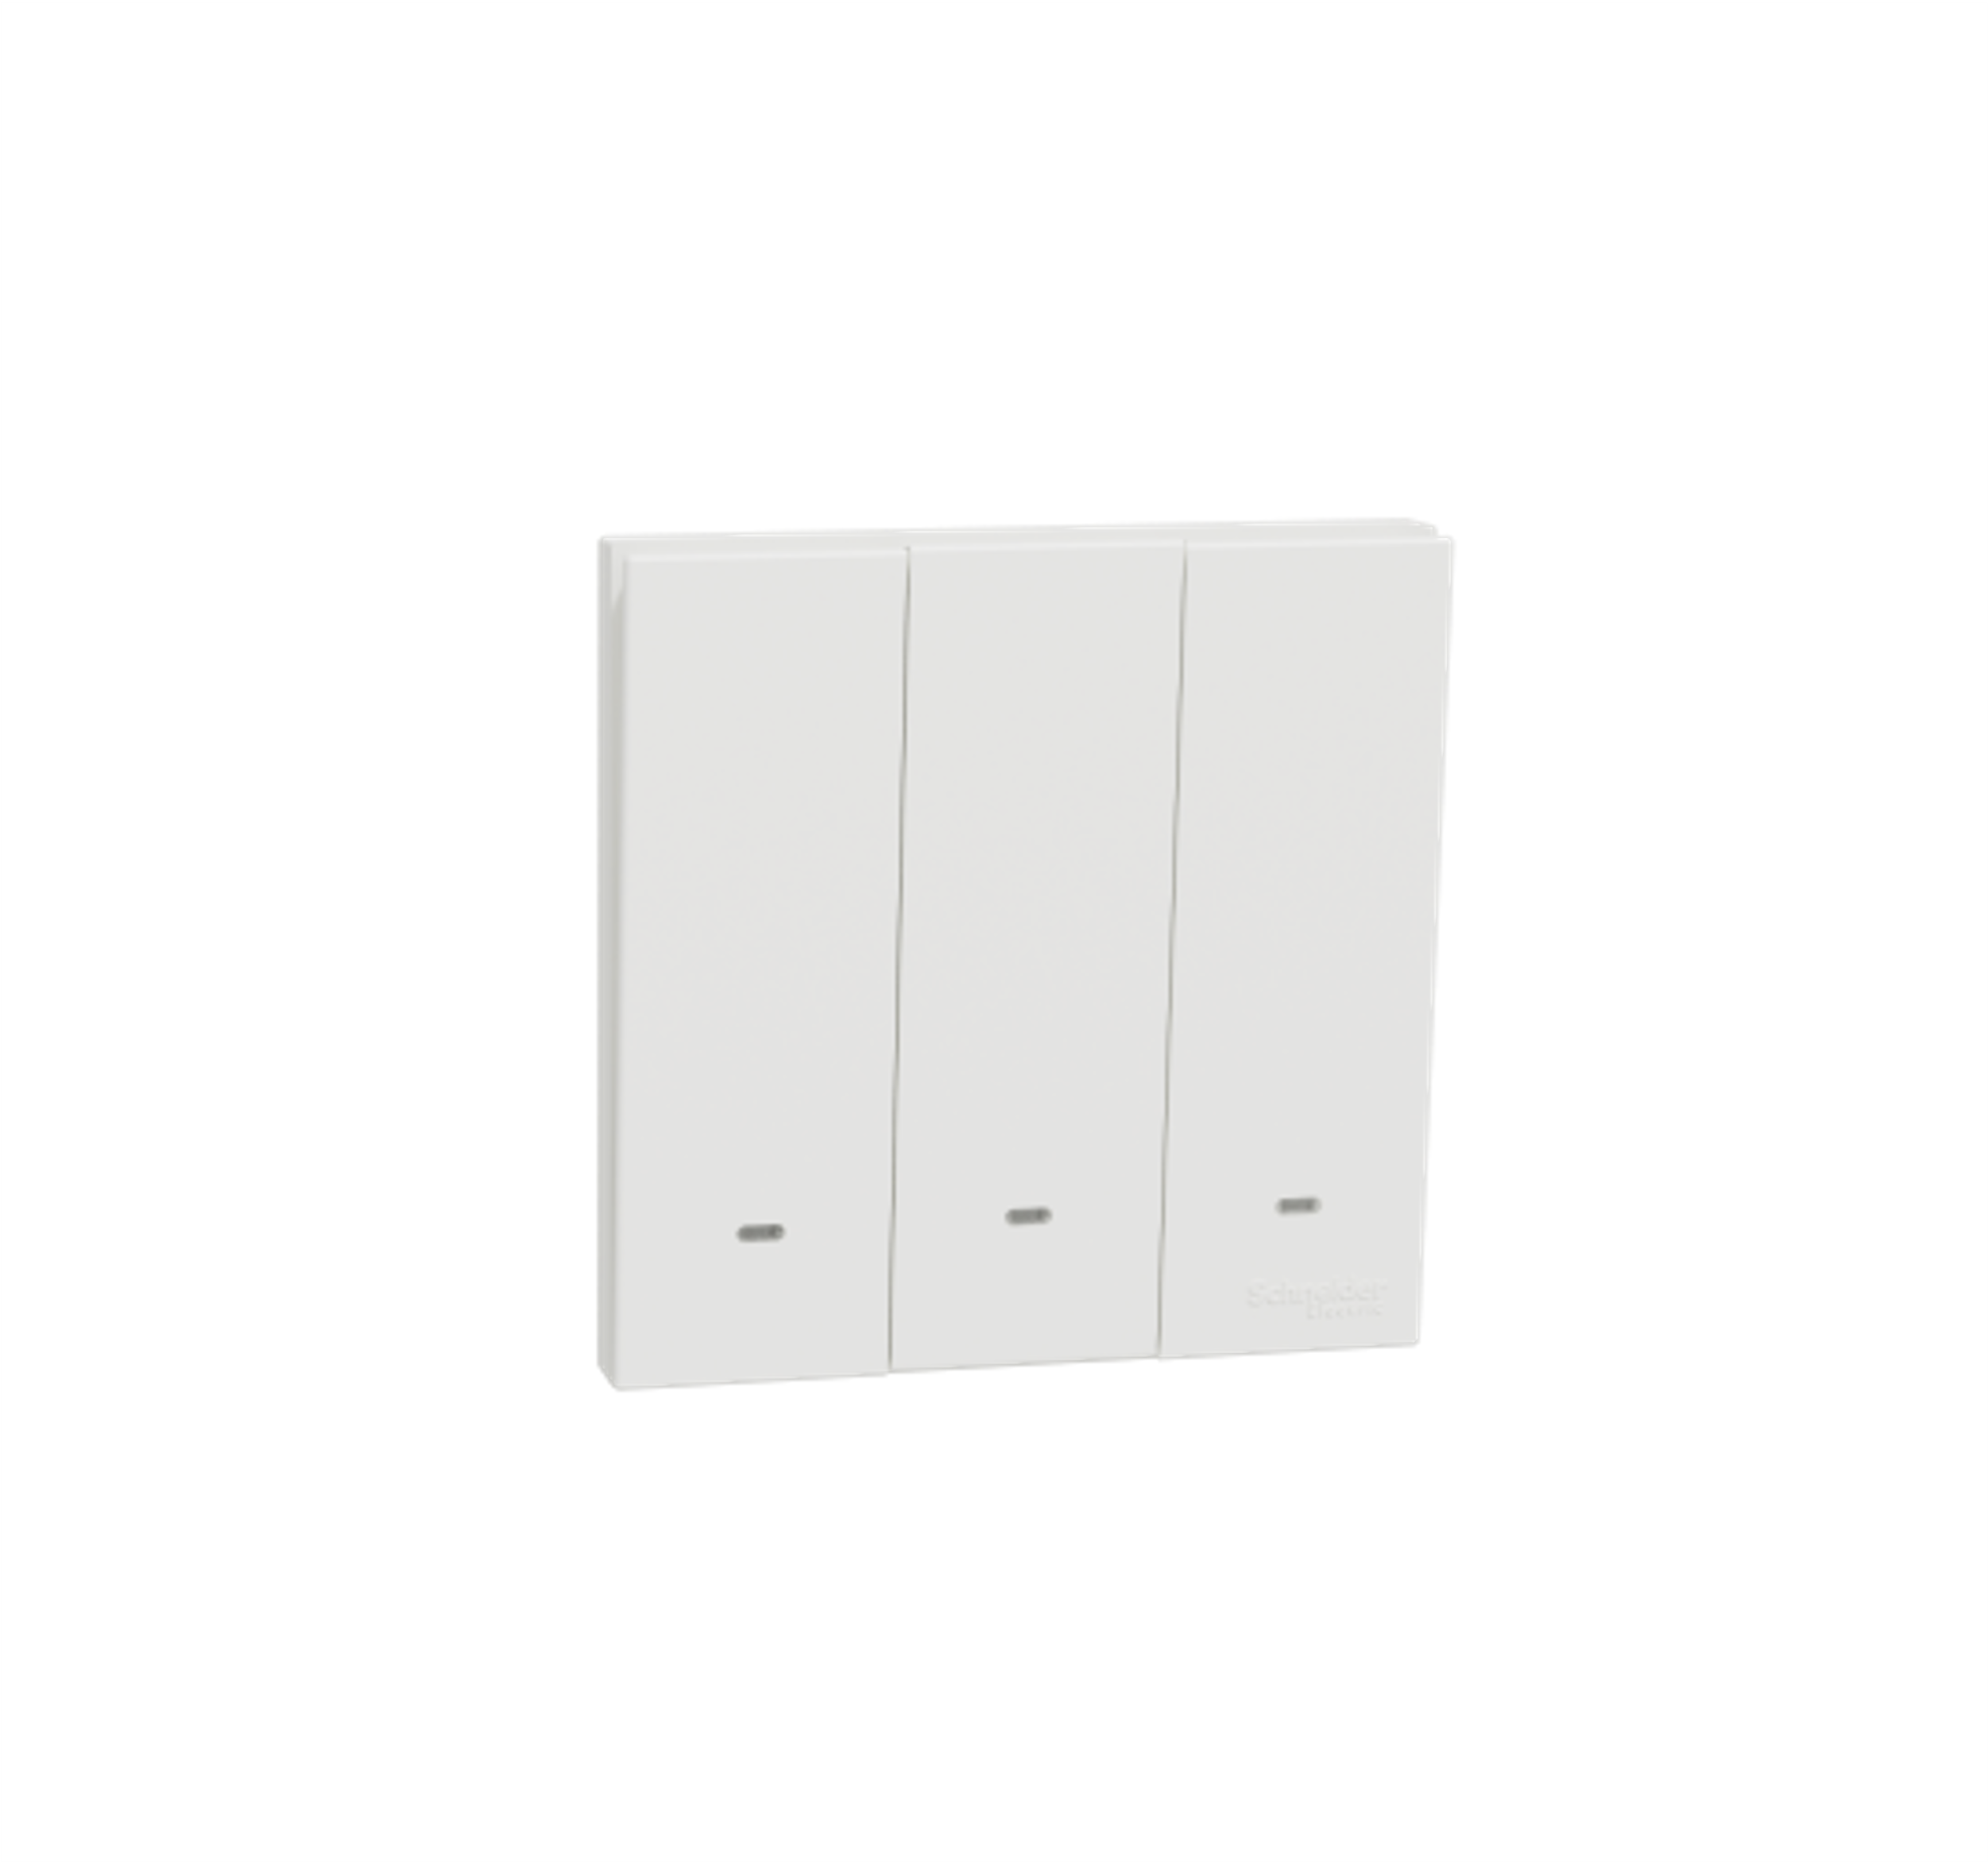 AvatarOn C - 10A 250V 3 Gang Momentary Switch with Fluorescent Lamp (White)